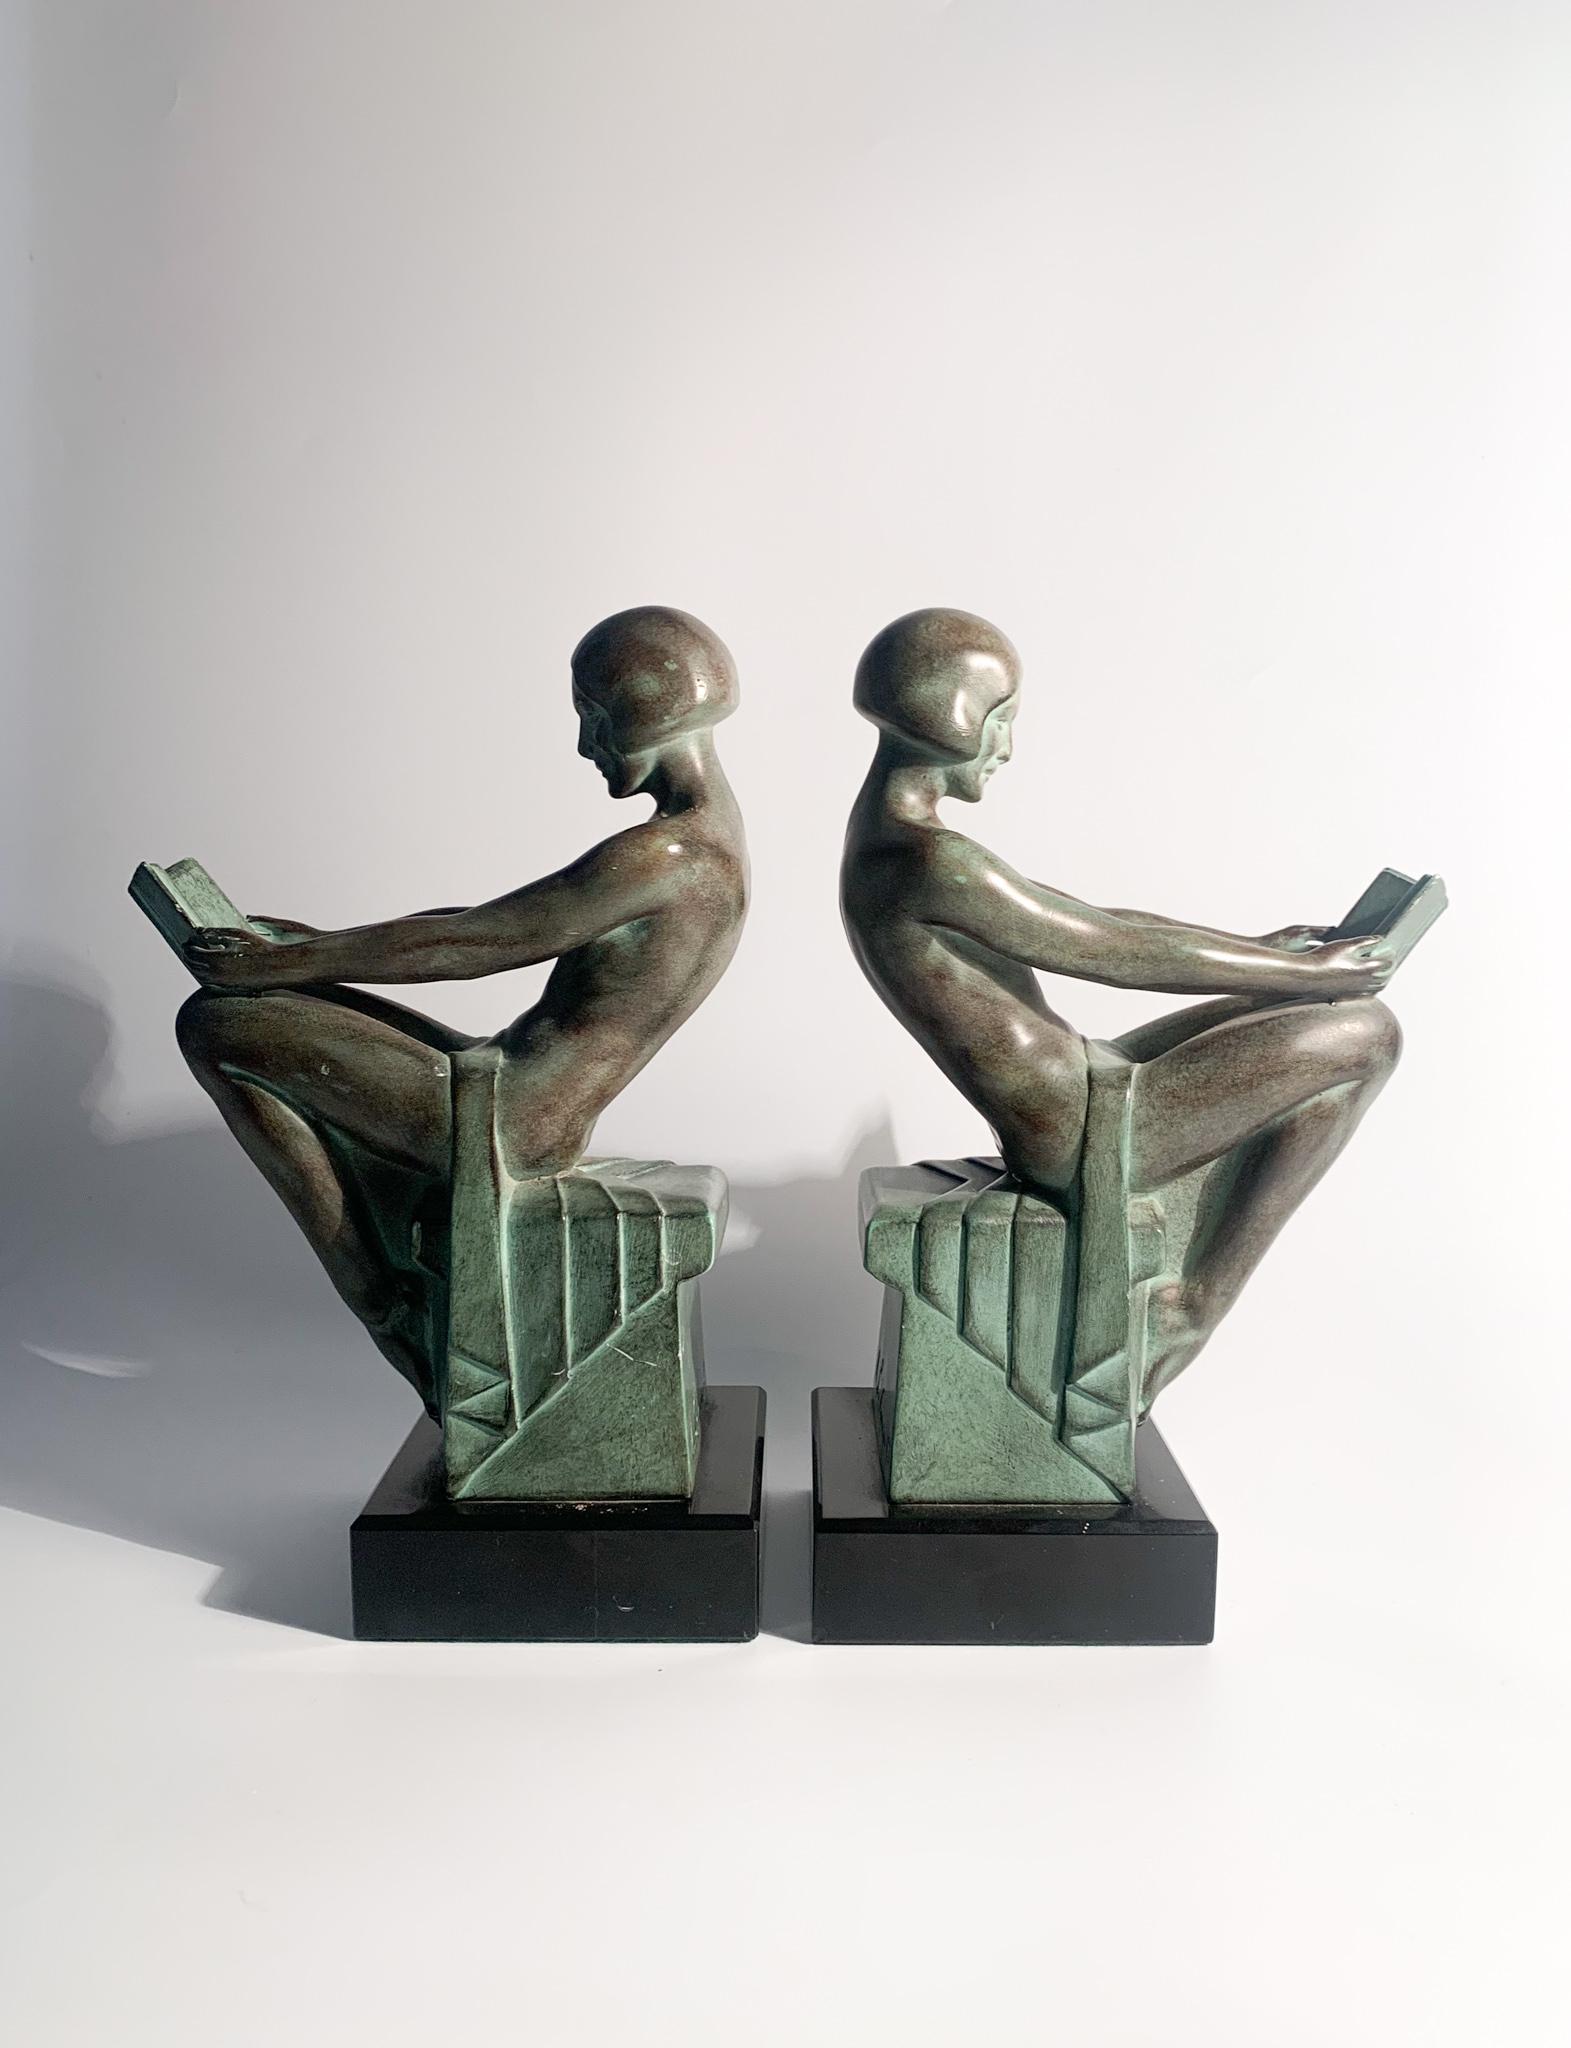 Pair of Art Decò bookends in artistic metal depicting a woman reading, made by Max Le Verrier in the 1930s

Measures: Ø cm 14 Ø cm 8 h cm 22

Max Le Verrier is an important Parisian sculptor born in 1891. Son of a goldsmith and sculptor, he